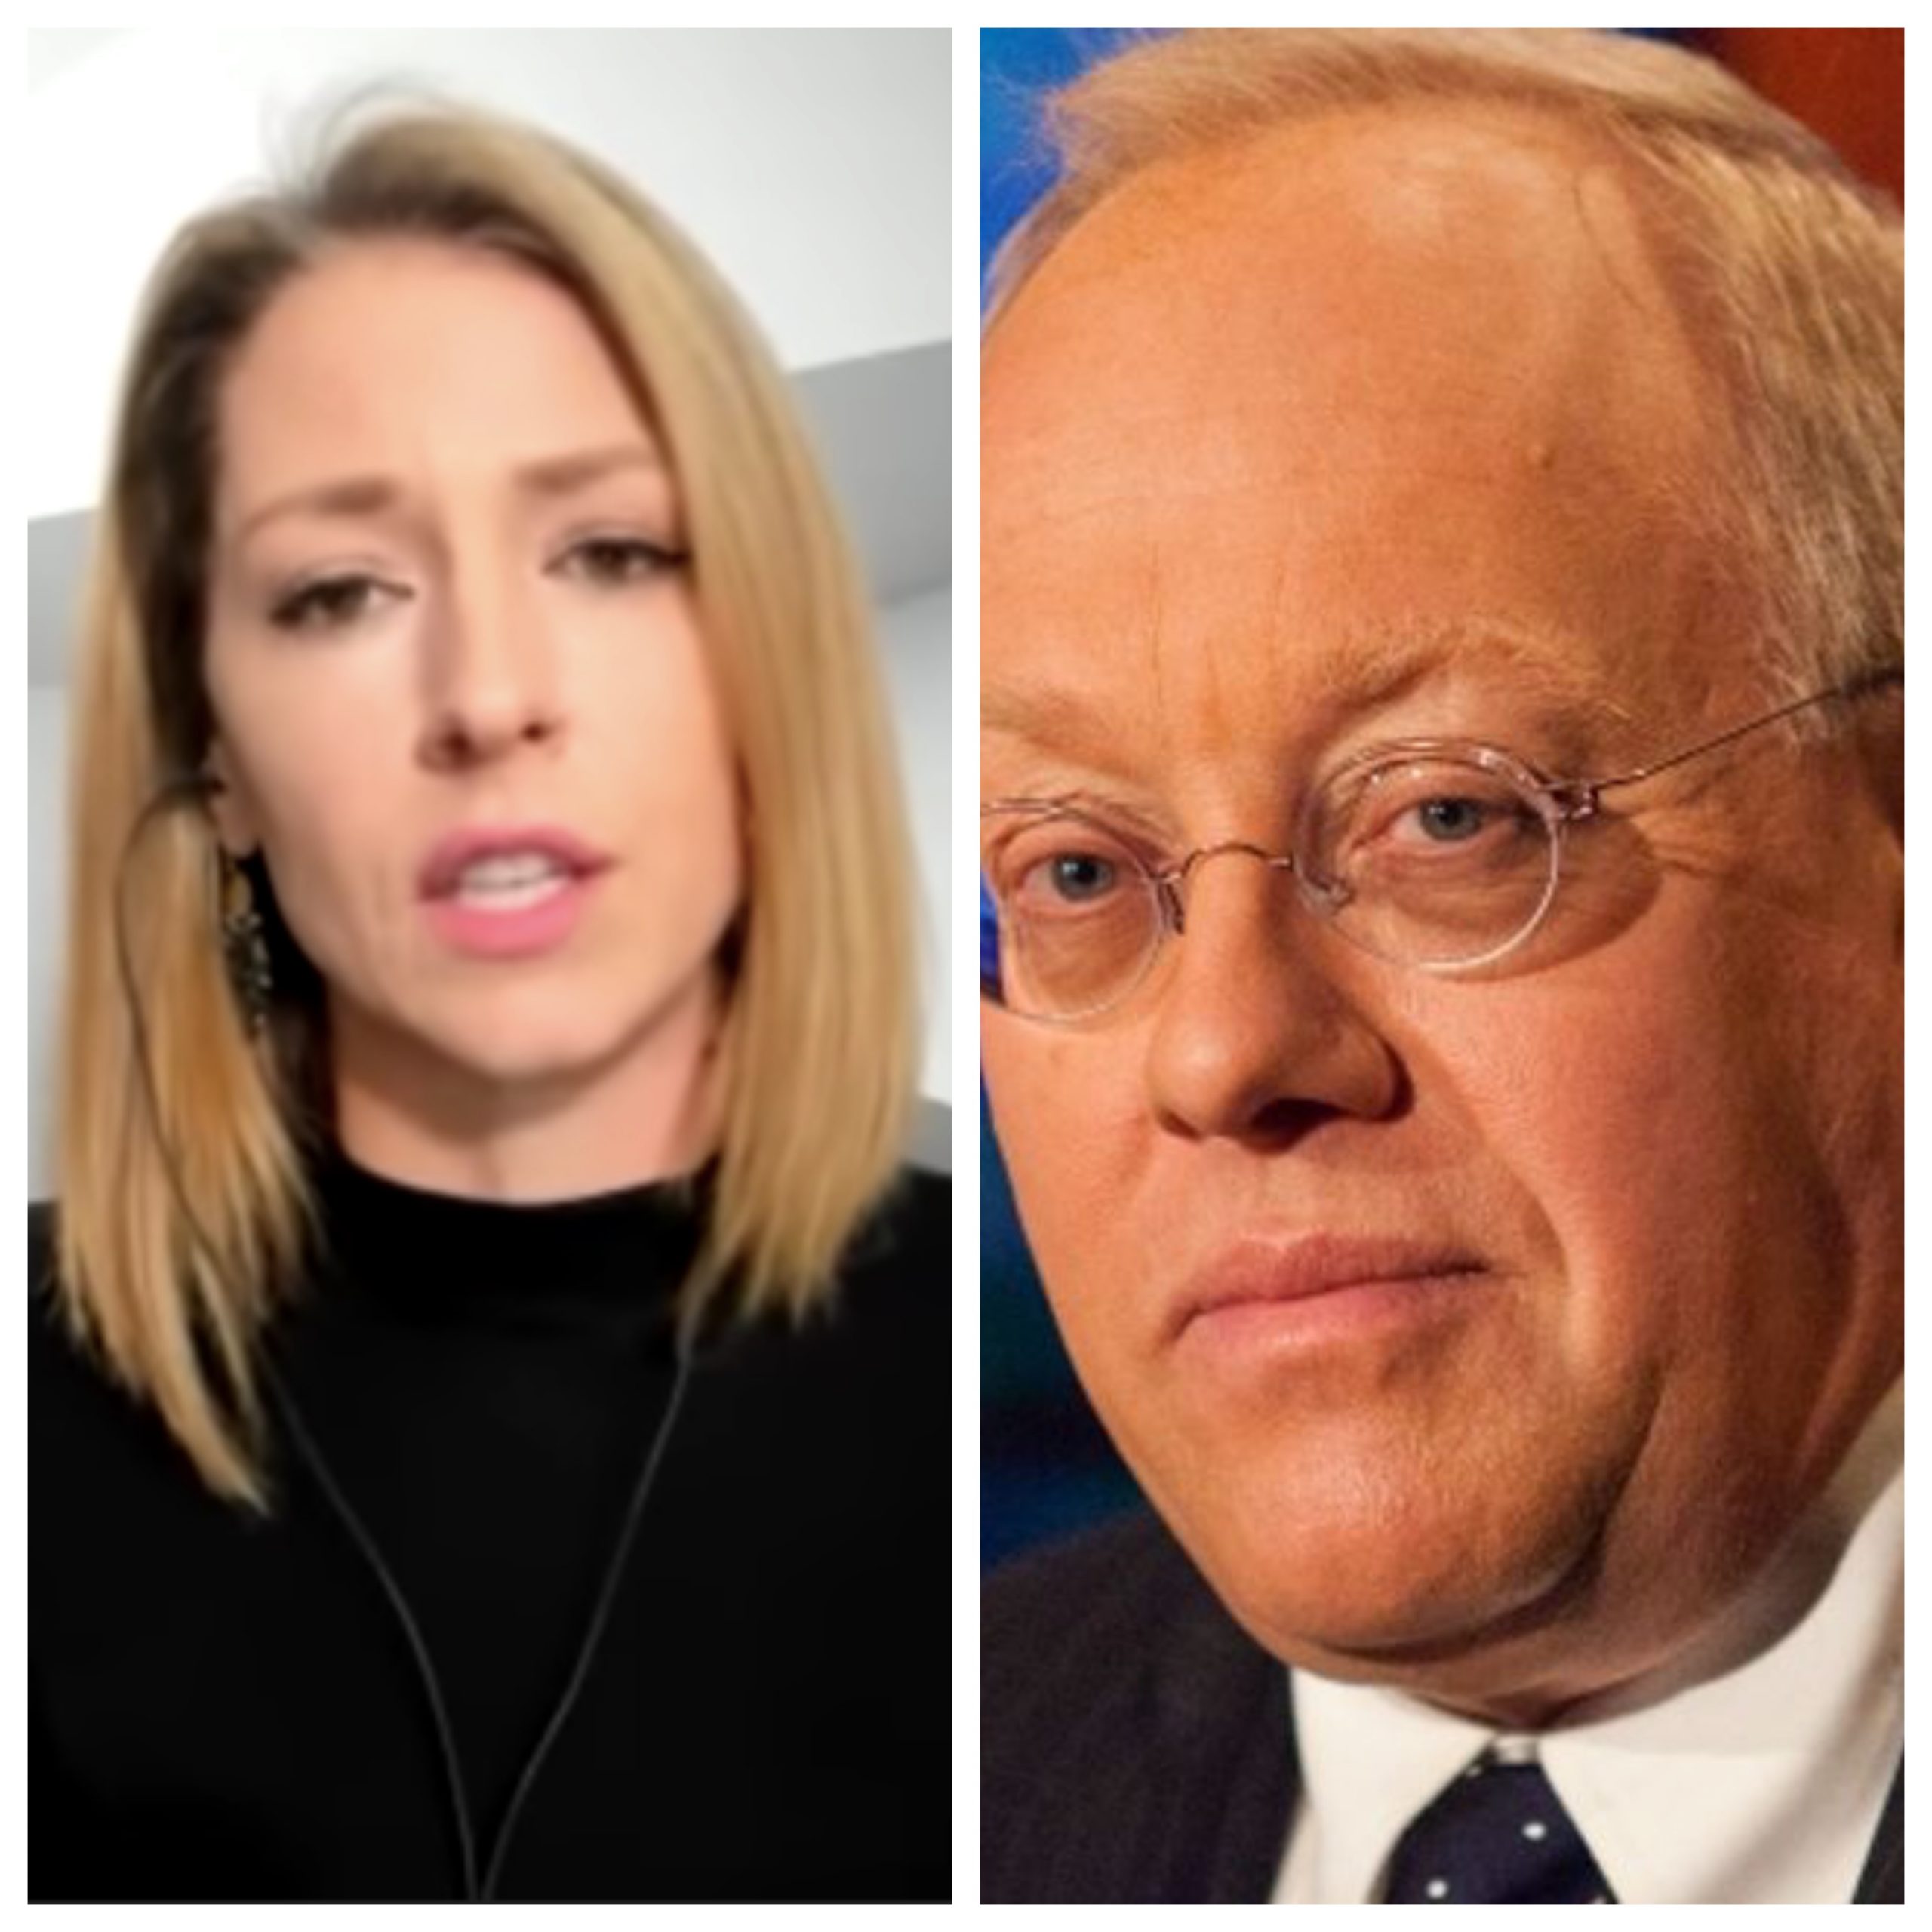 Updated: Chris Hedges and Abby Martin: The latest YouTube ‘Disappeared’ Victims